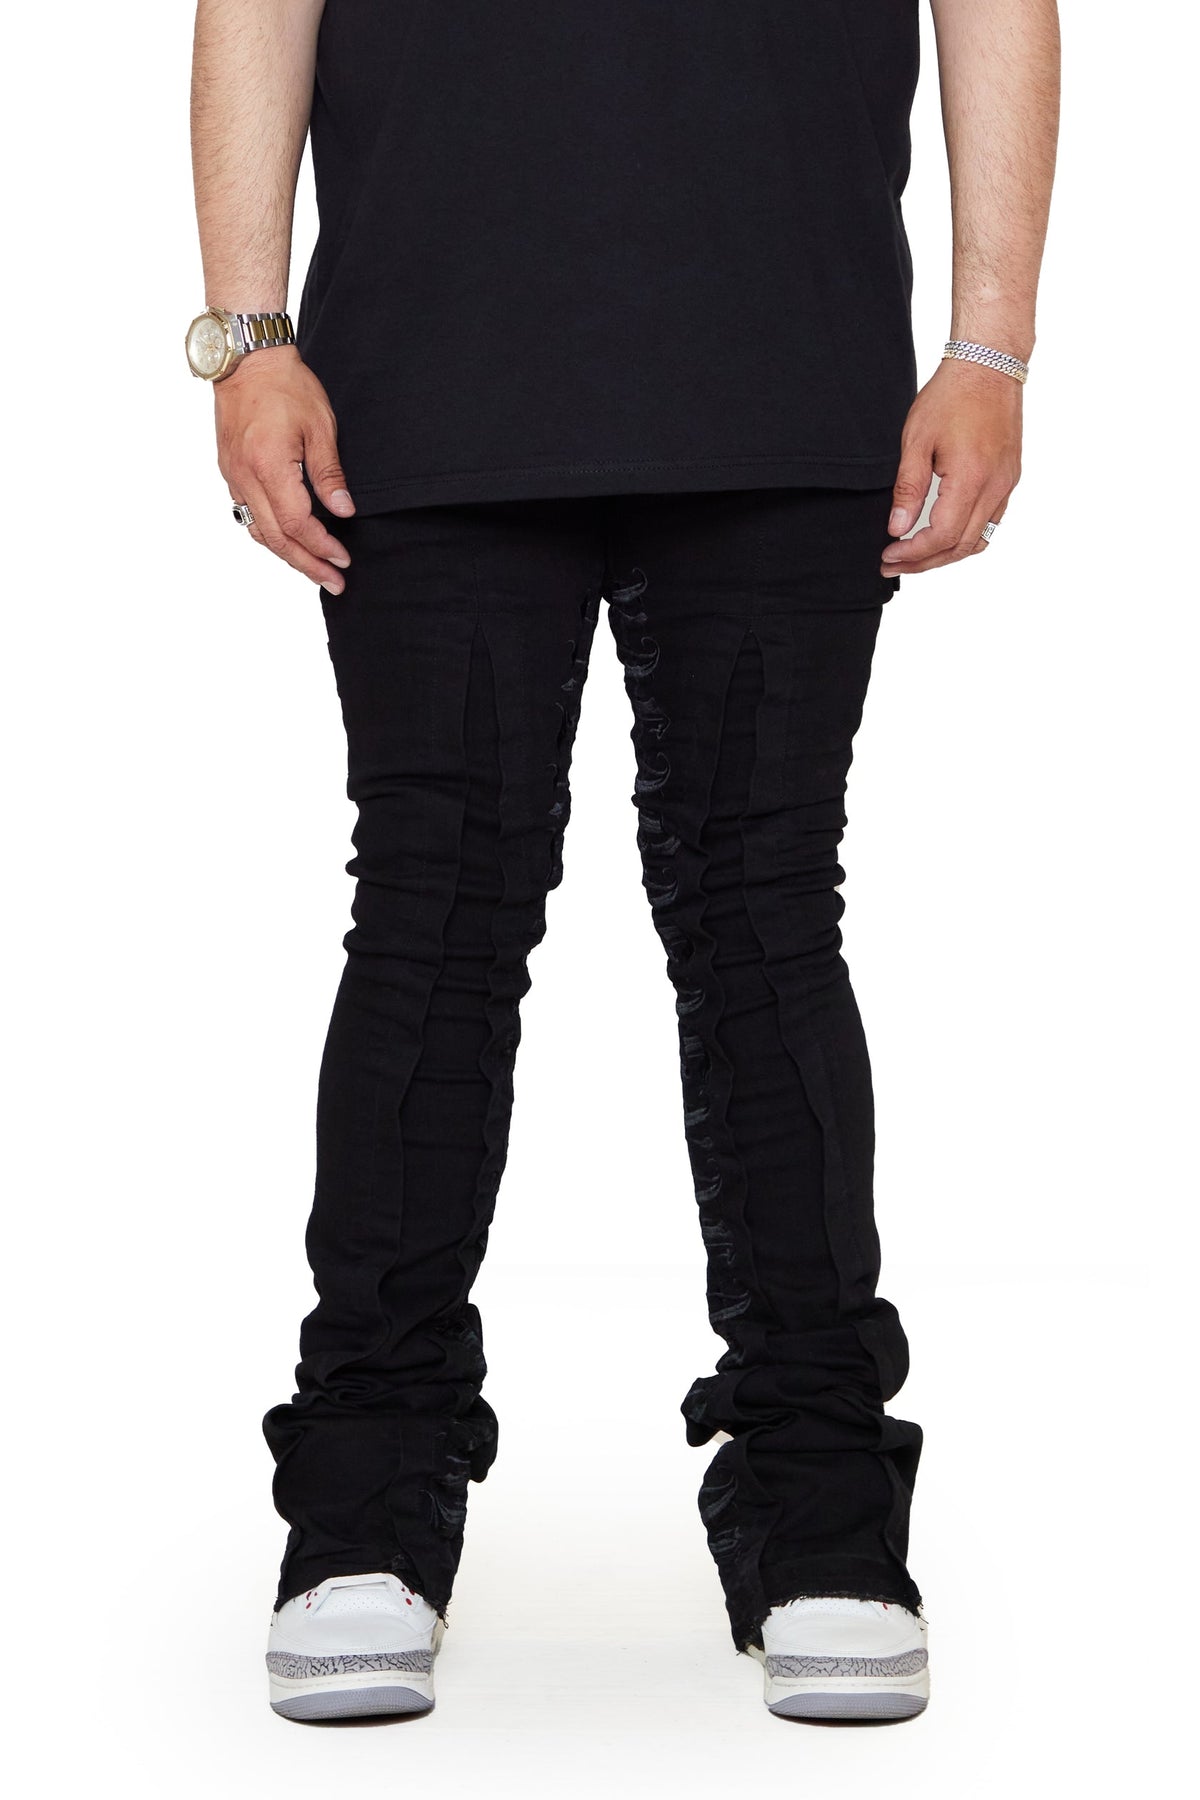 "PURPOSE" Valabasas stacked jeans in a captivating BLACK